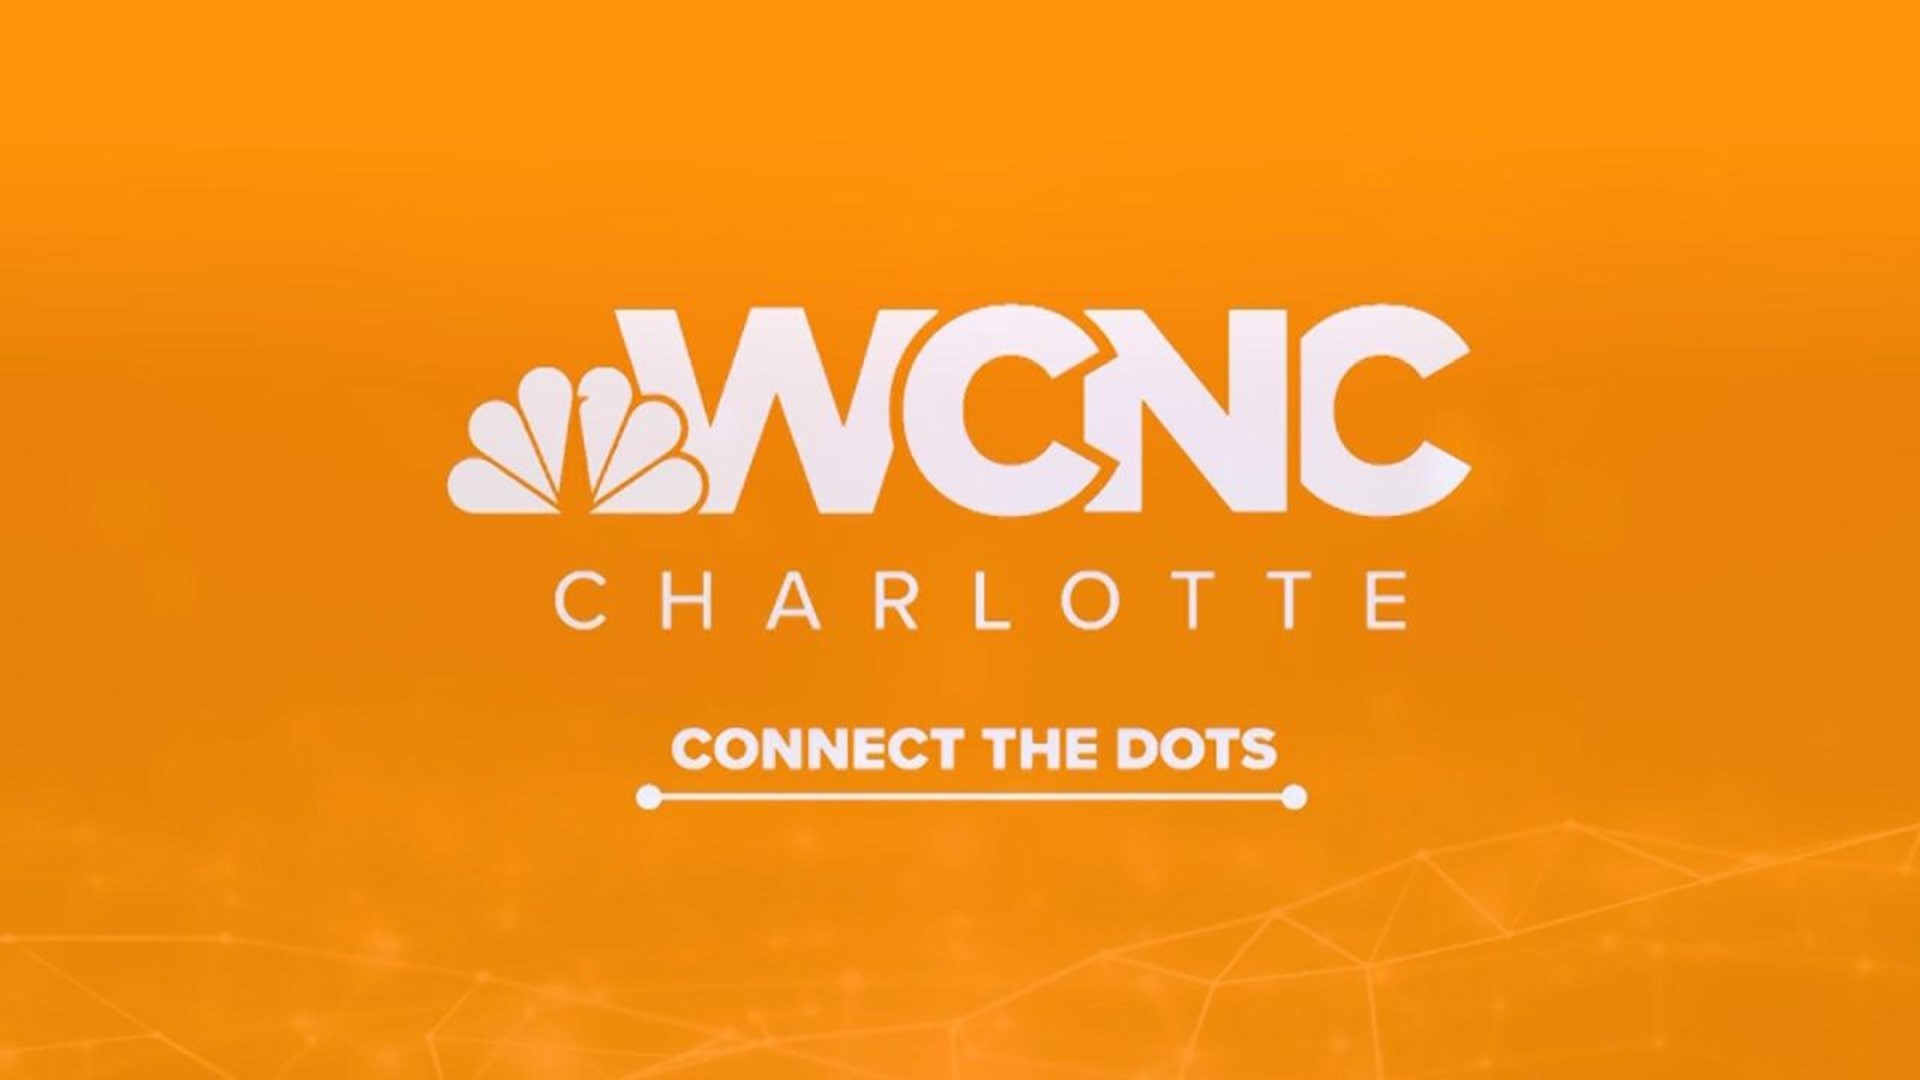 WCNC Charlotte is here to make sure the news makes sense, and with Connect the Dots, you'll understand how the headlines impact your family.